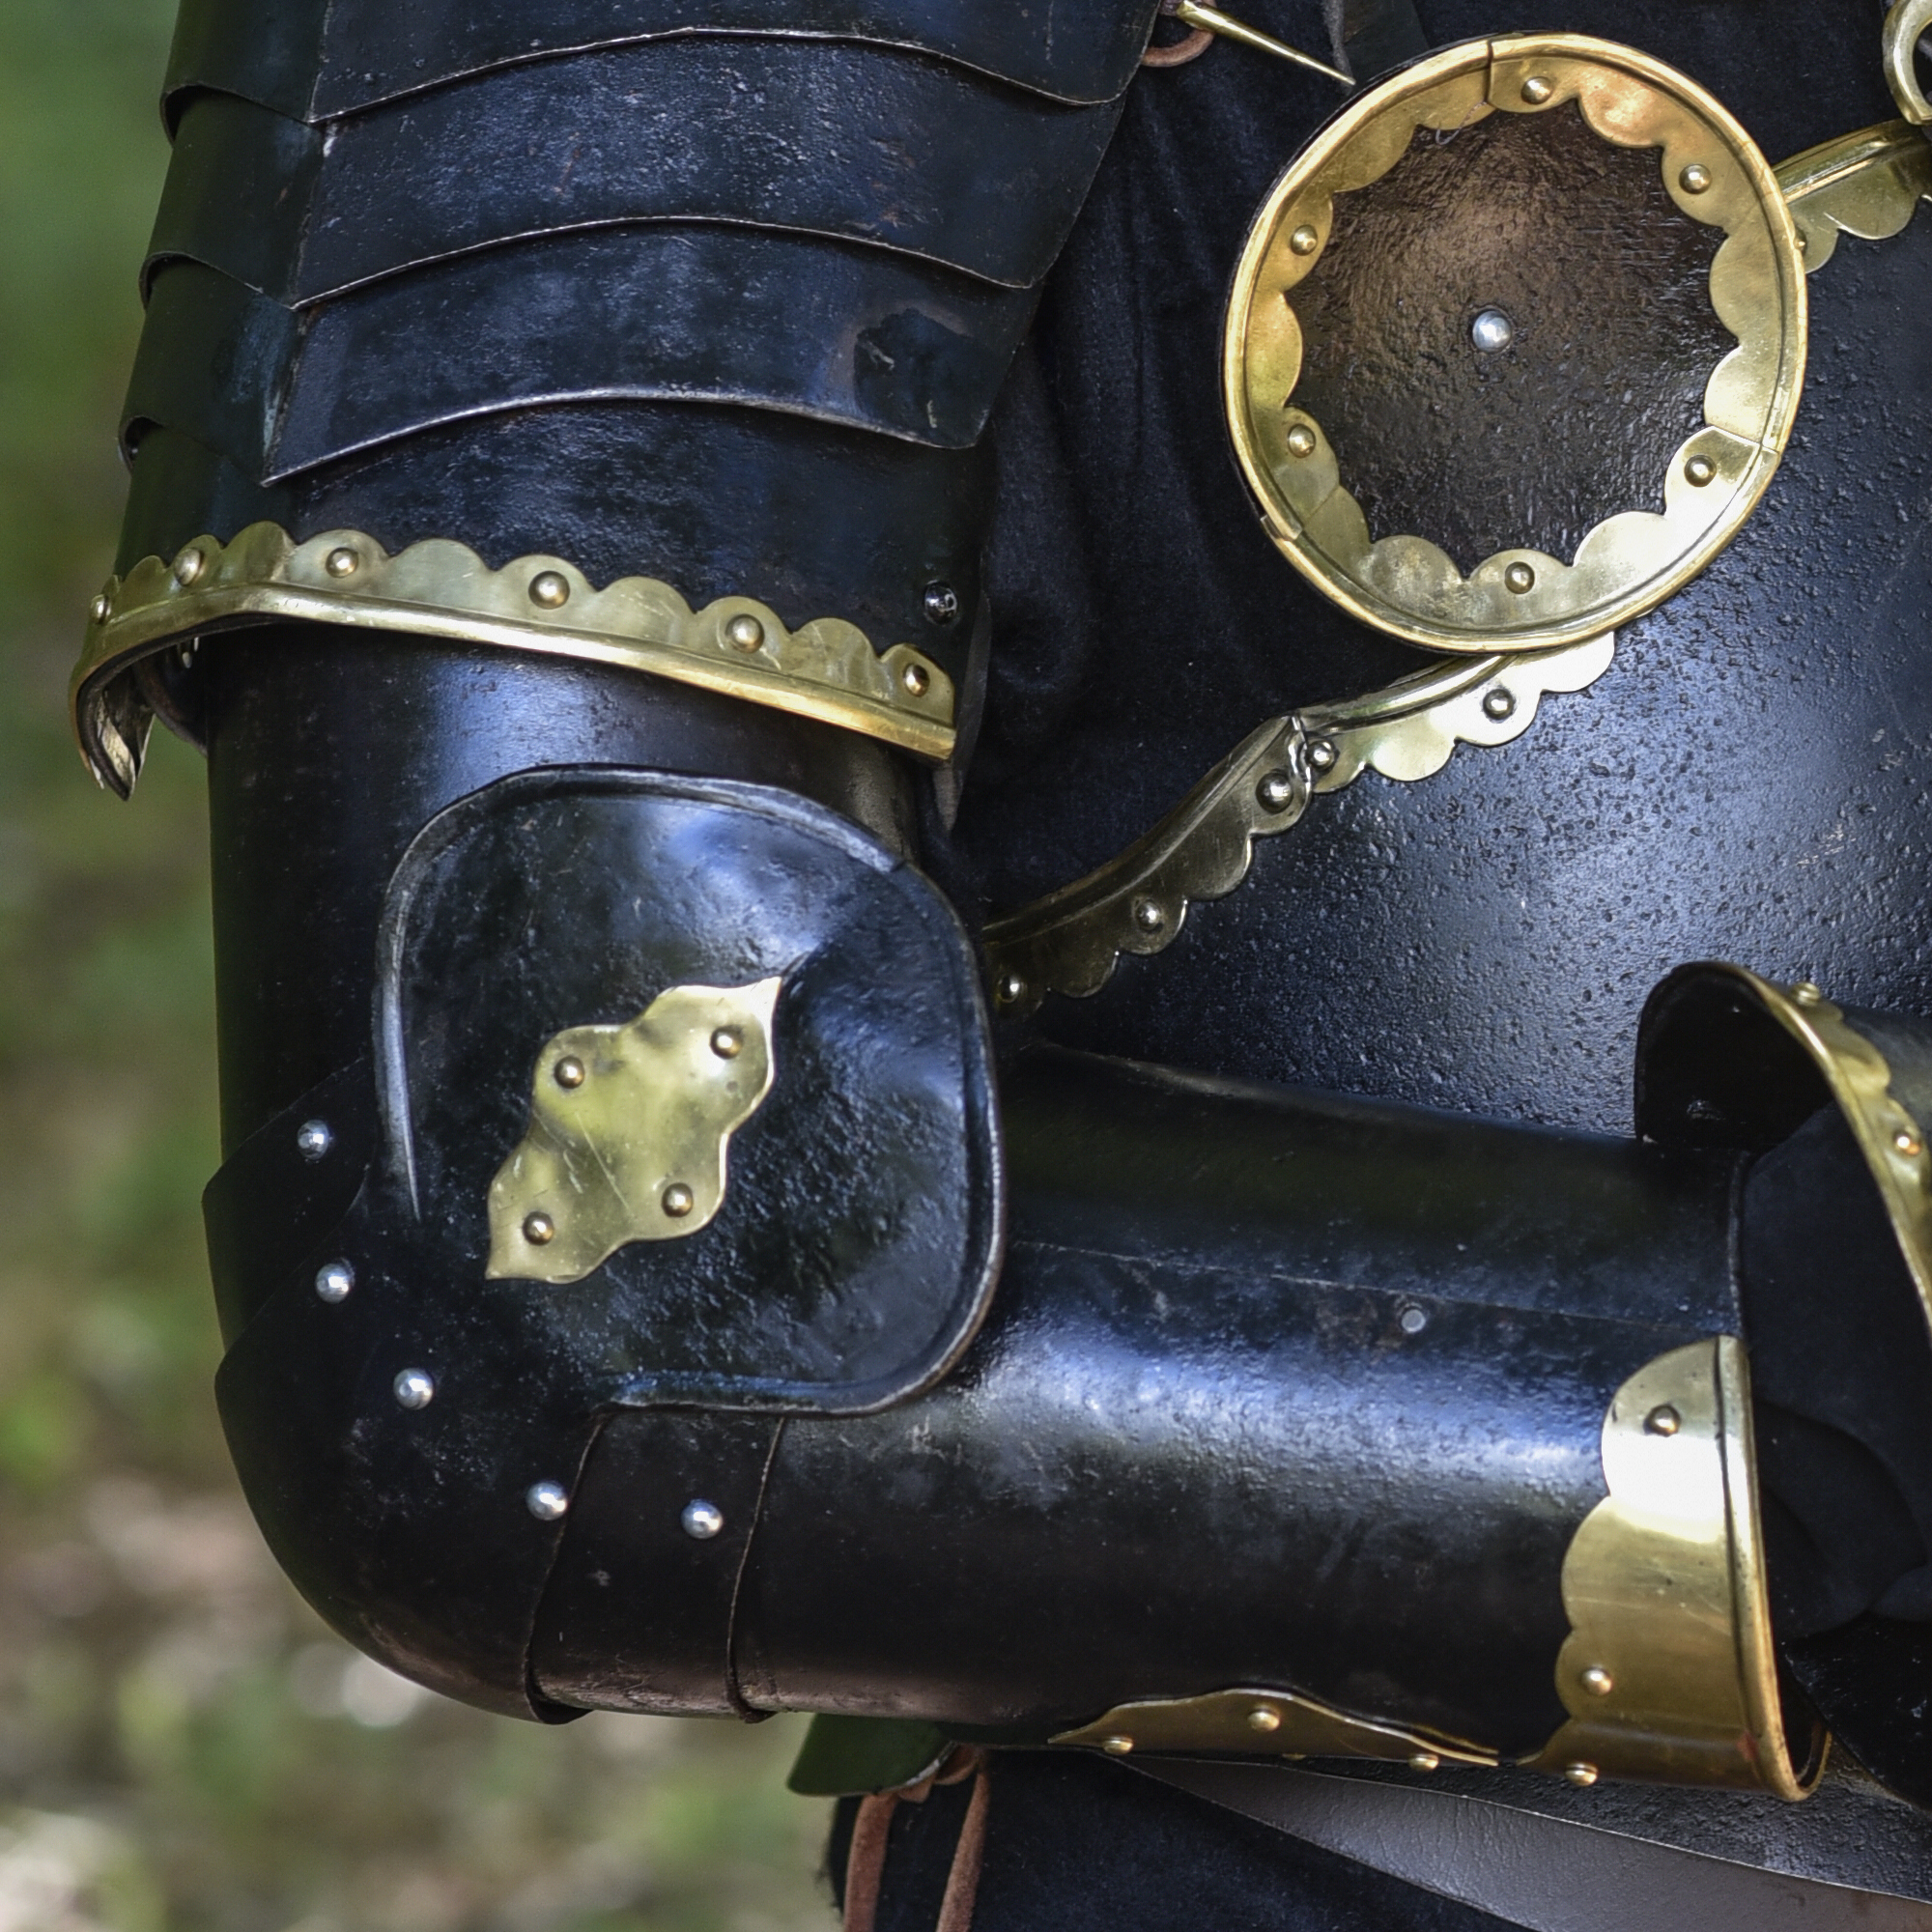 Armory Replicas ™ The Cursed Black Knight Functional Medieval